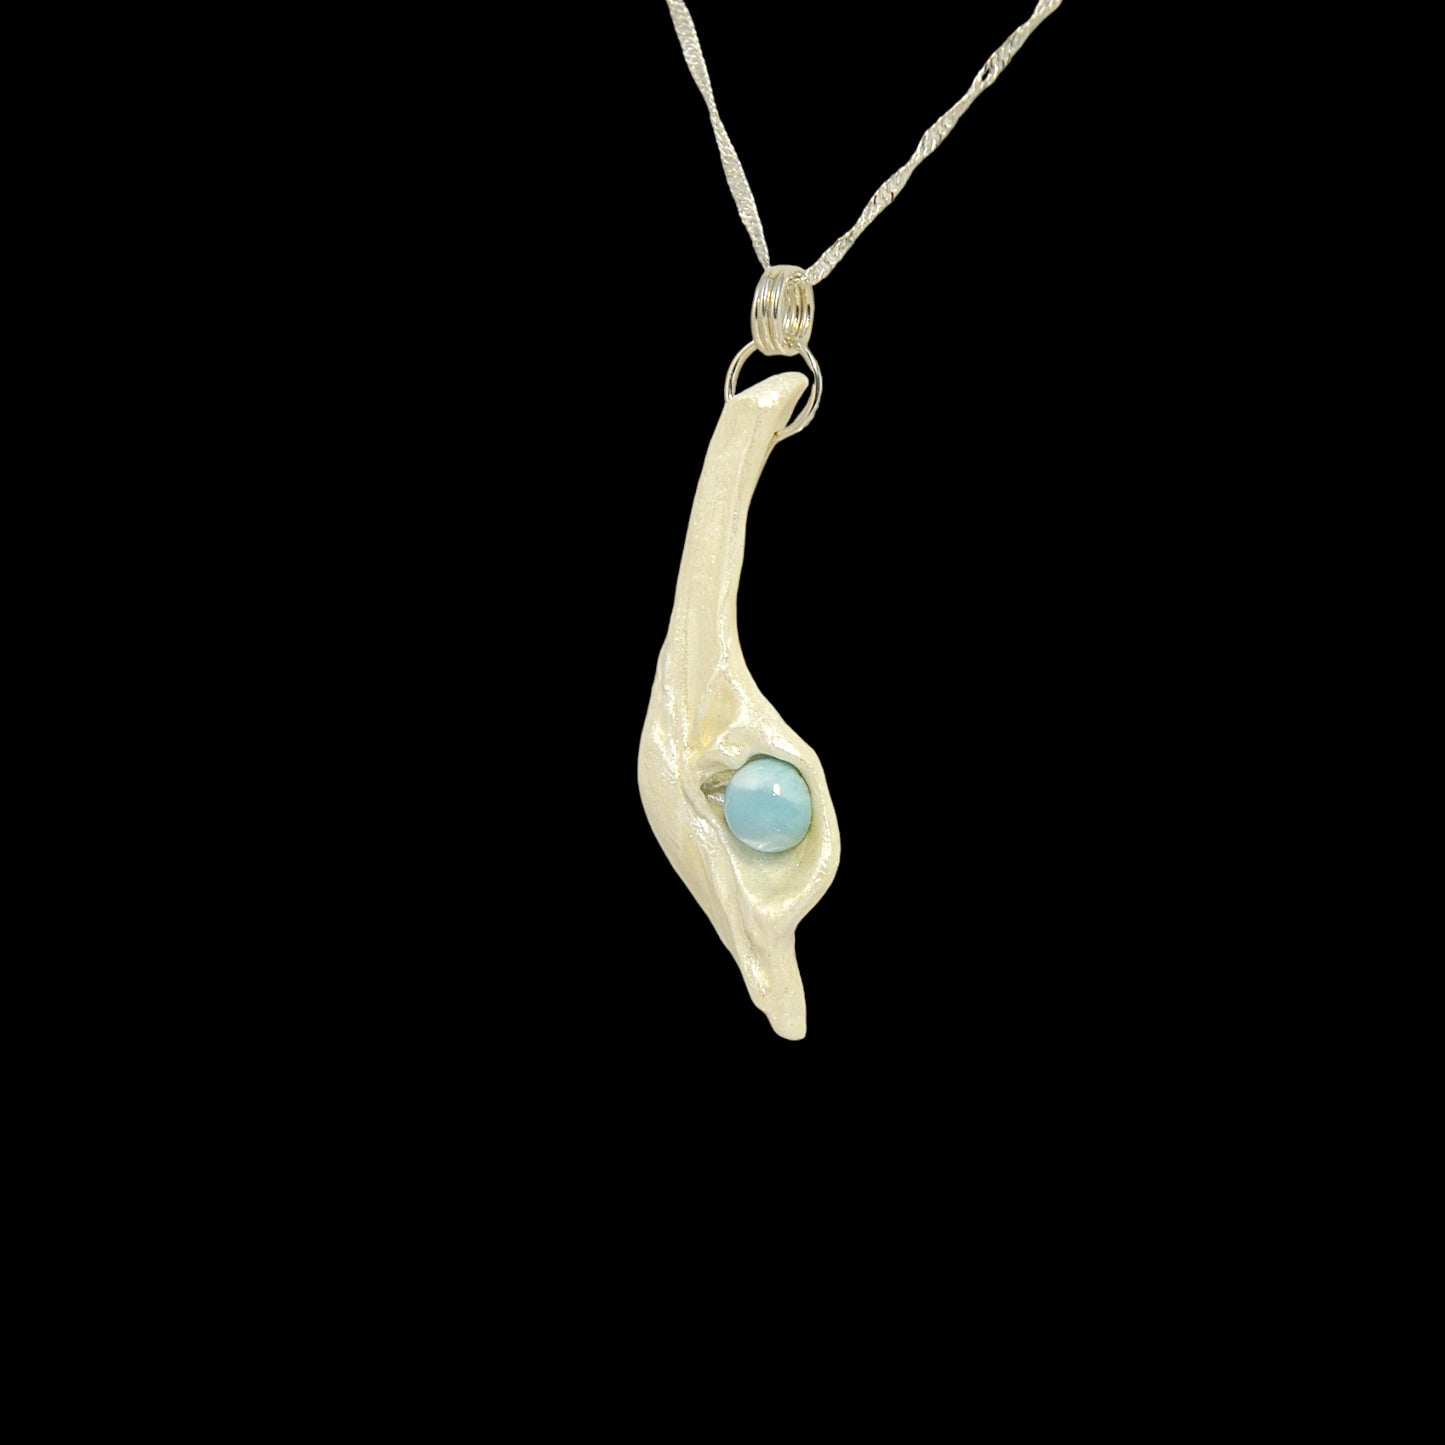 Larimar Moon Natural seashell a beautiful 10 mm Round Larimar Gemstone compliments the pendant. The pendant is shown turned so the viewer can see the left side of the pendant.